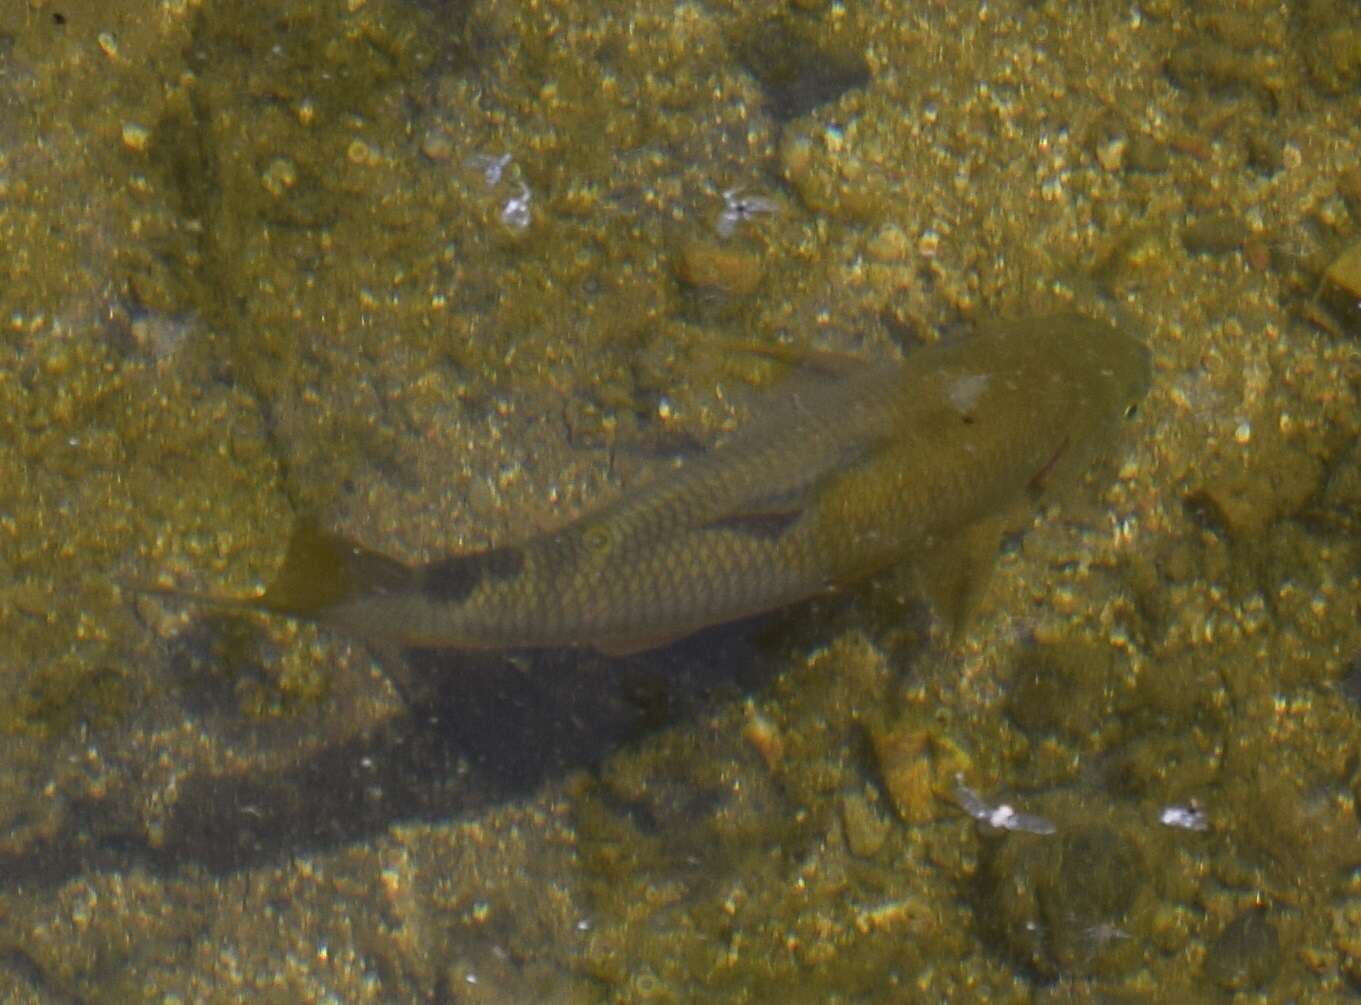 Image of Andalusian Barbel